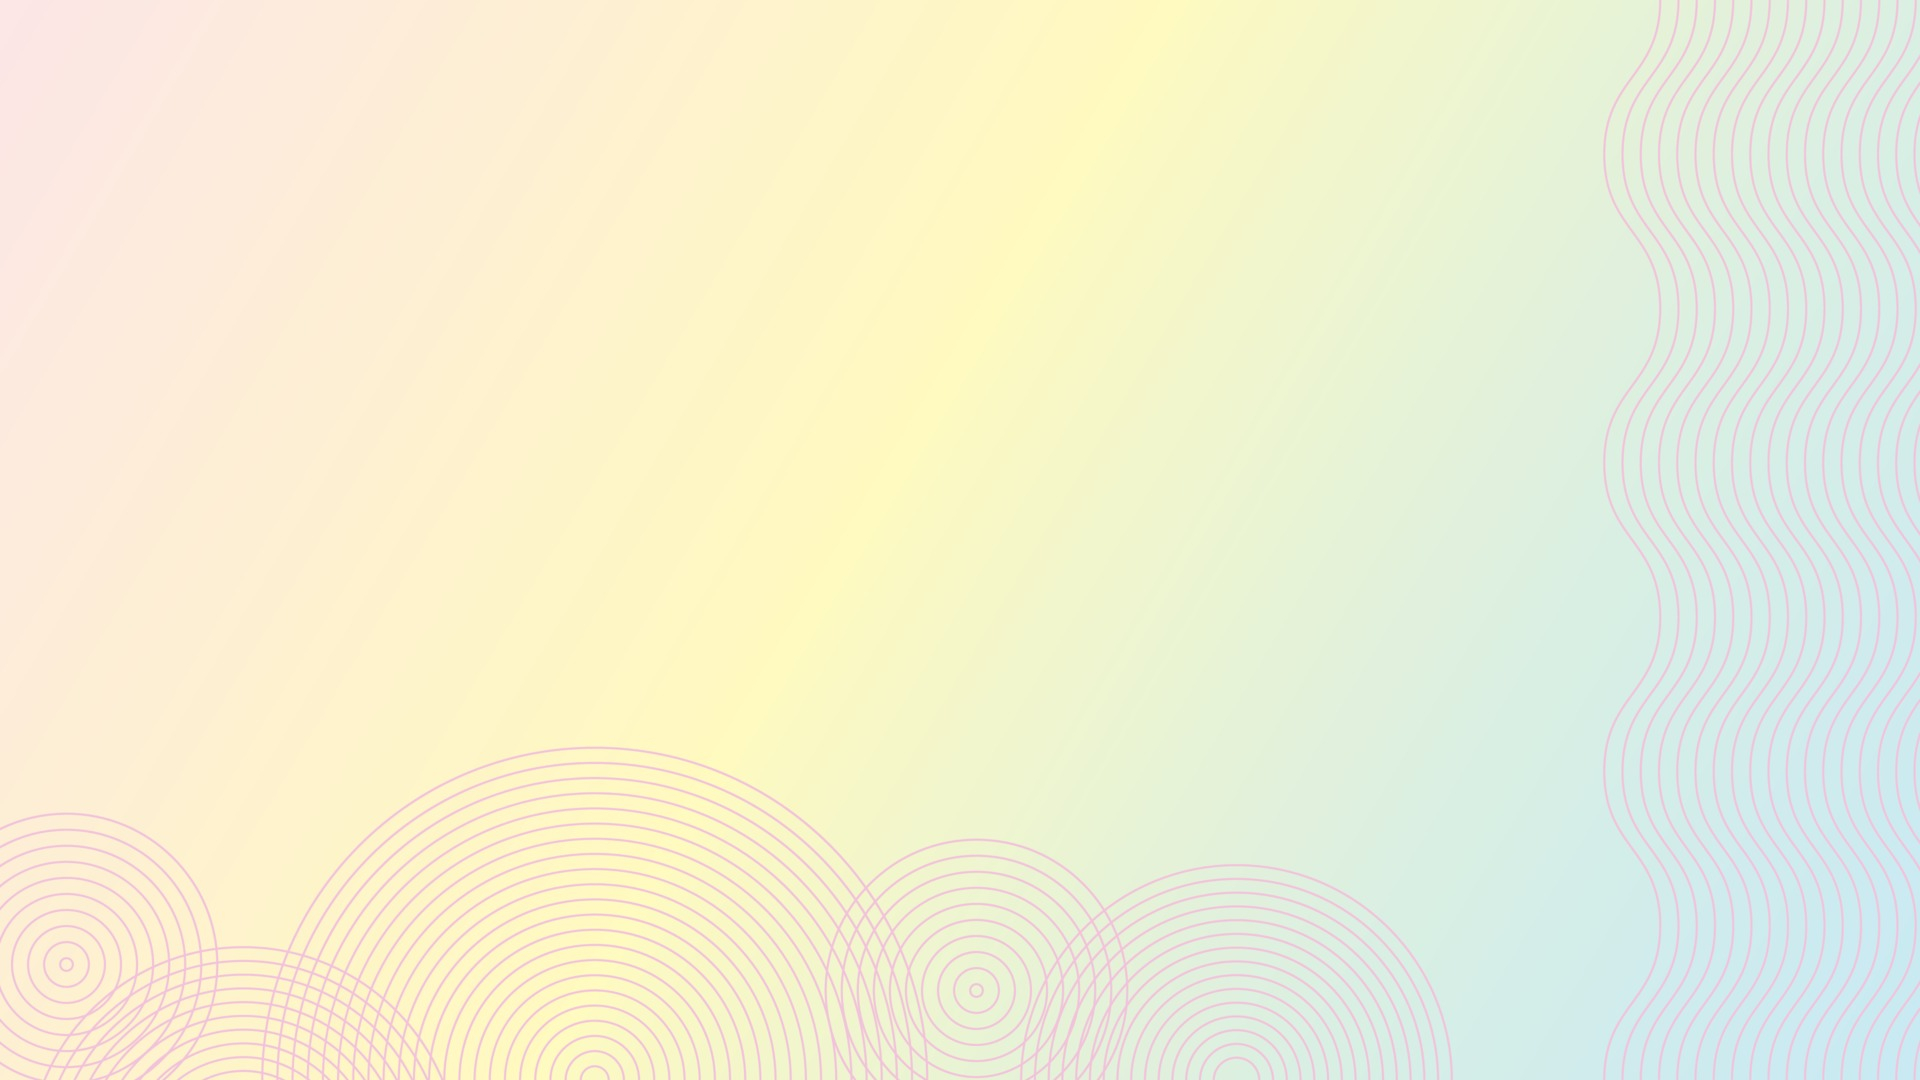 1920x1080 abstract background with soft color palette and circles 3455732 Vector Art